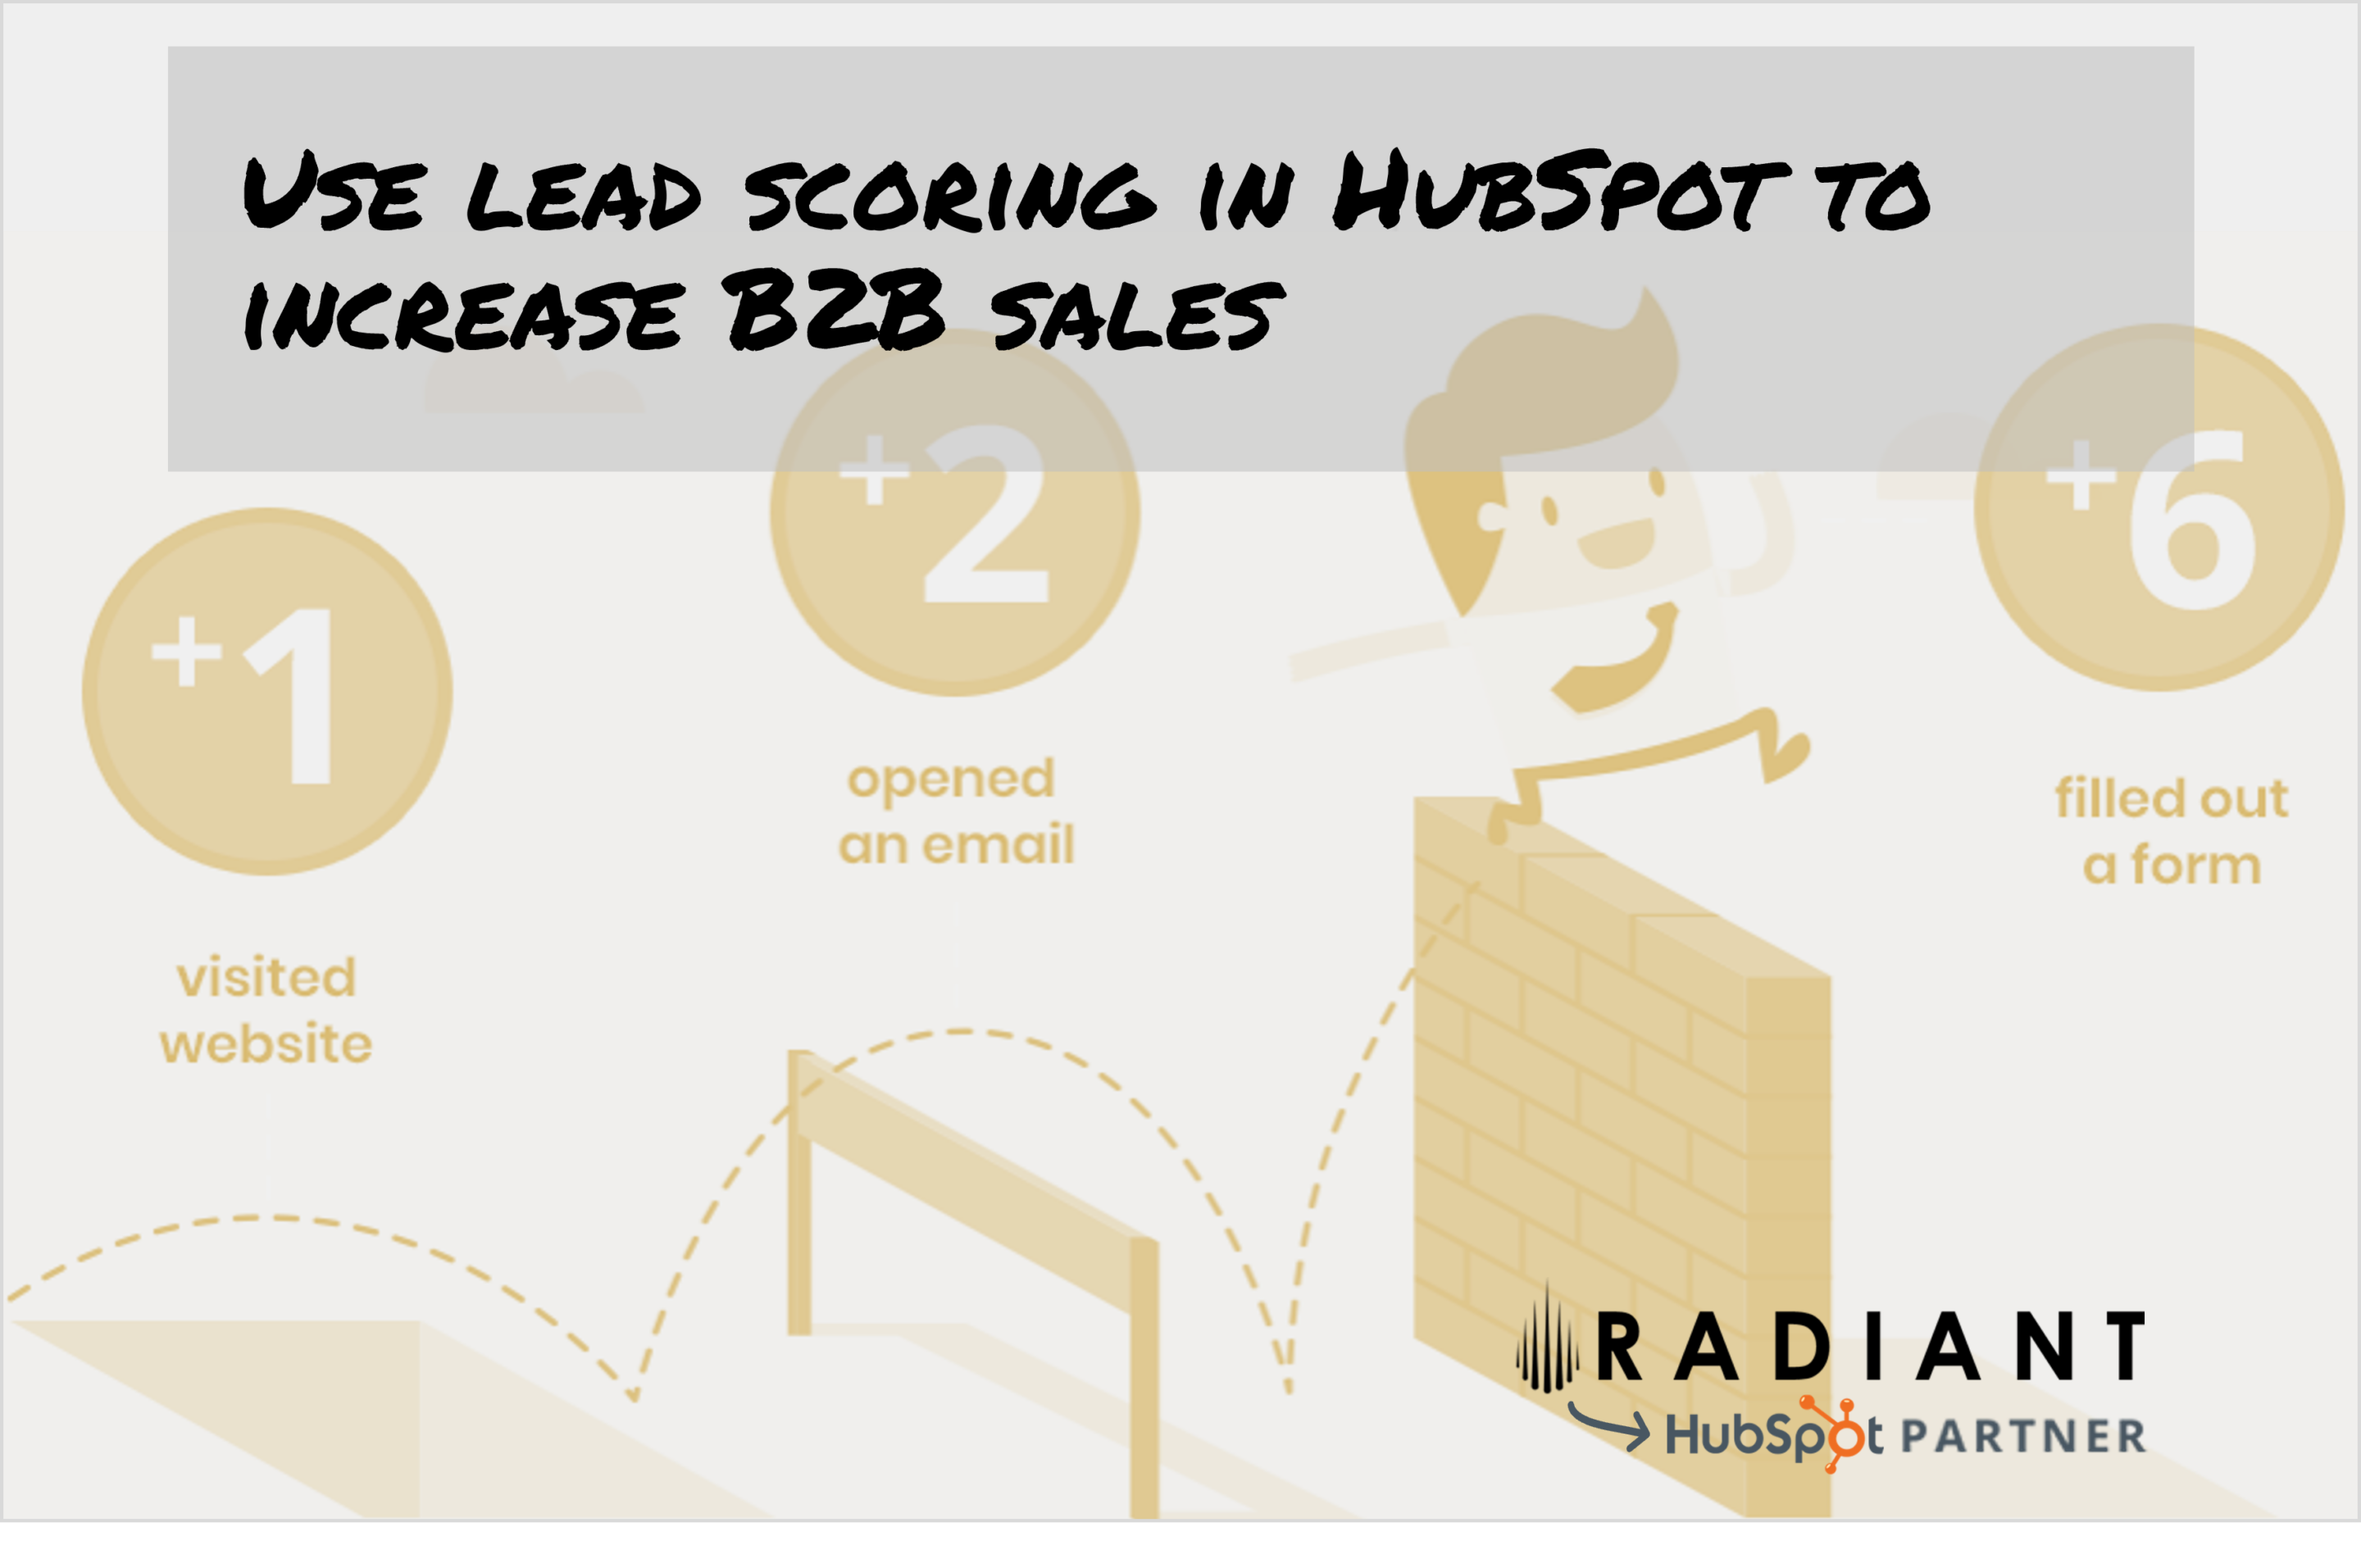 Use lead scoring in HubSpot to increase B2B sales. Learn how to assess the quality of your leads in HubSpot.